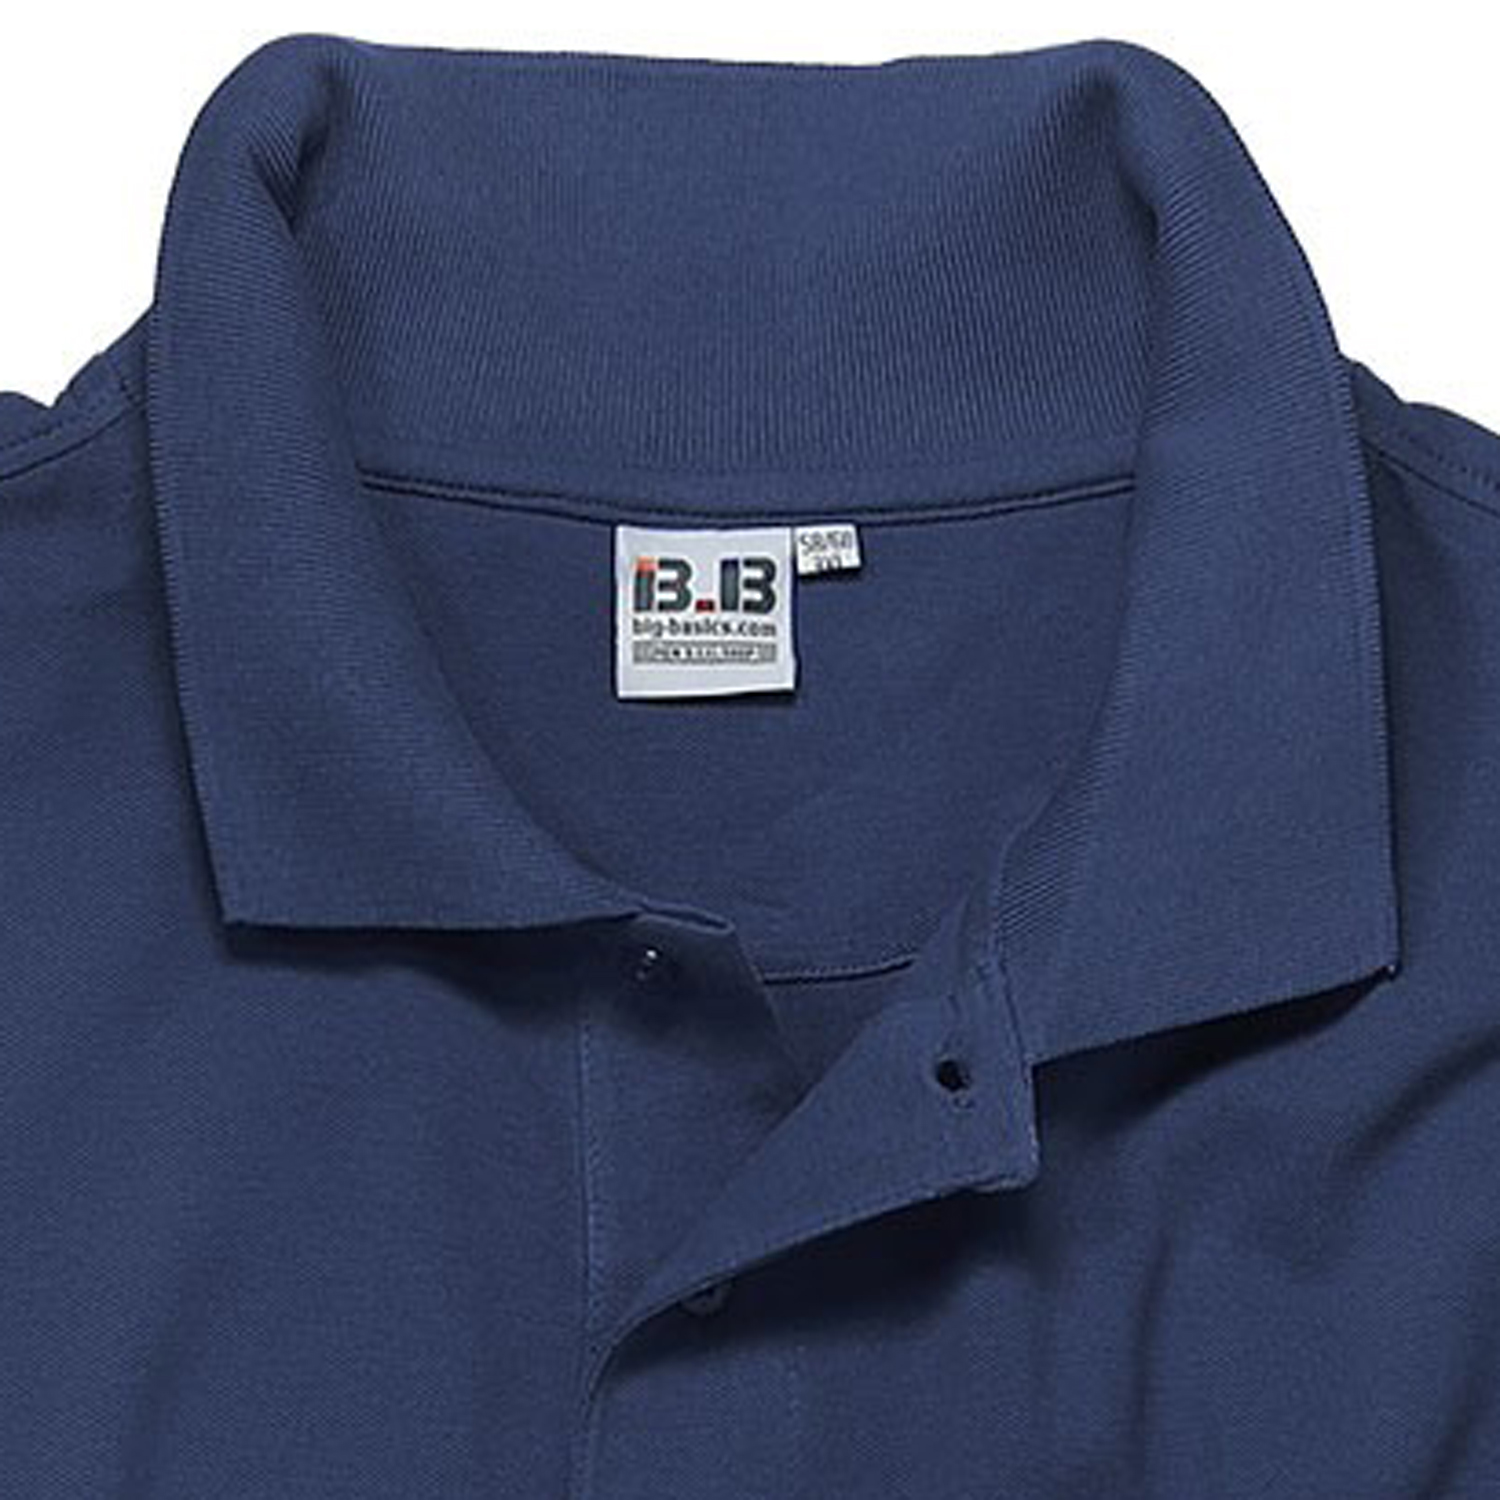 Darkblue polo shirt by Big-Basics in oversizes up to 8XL